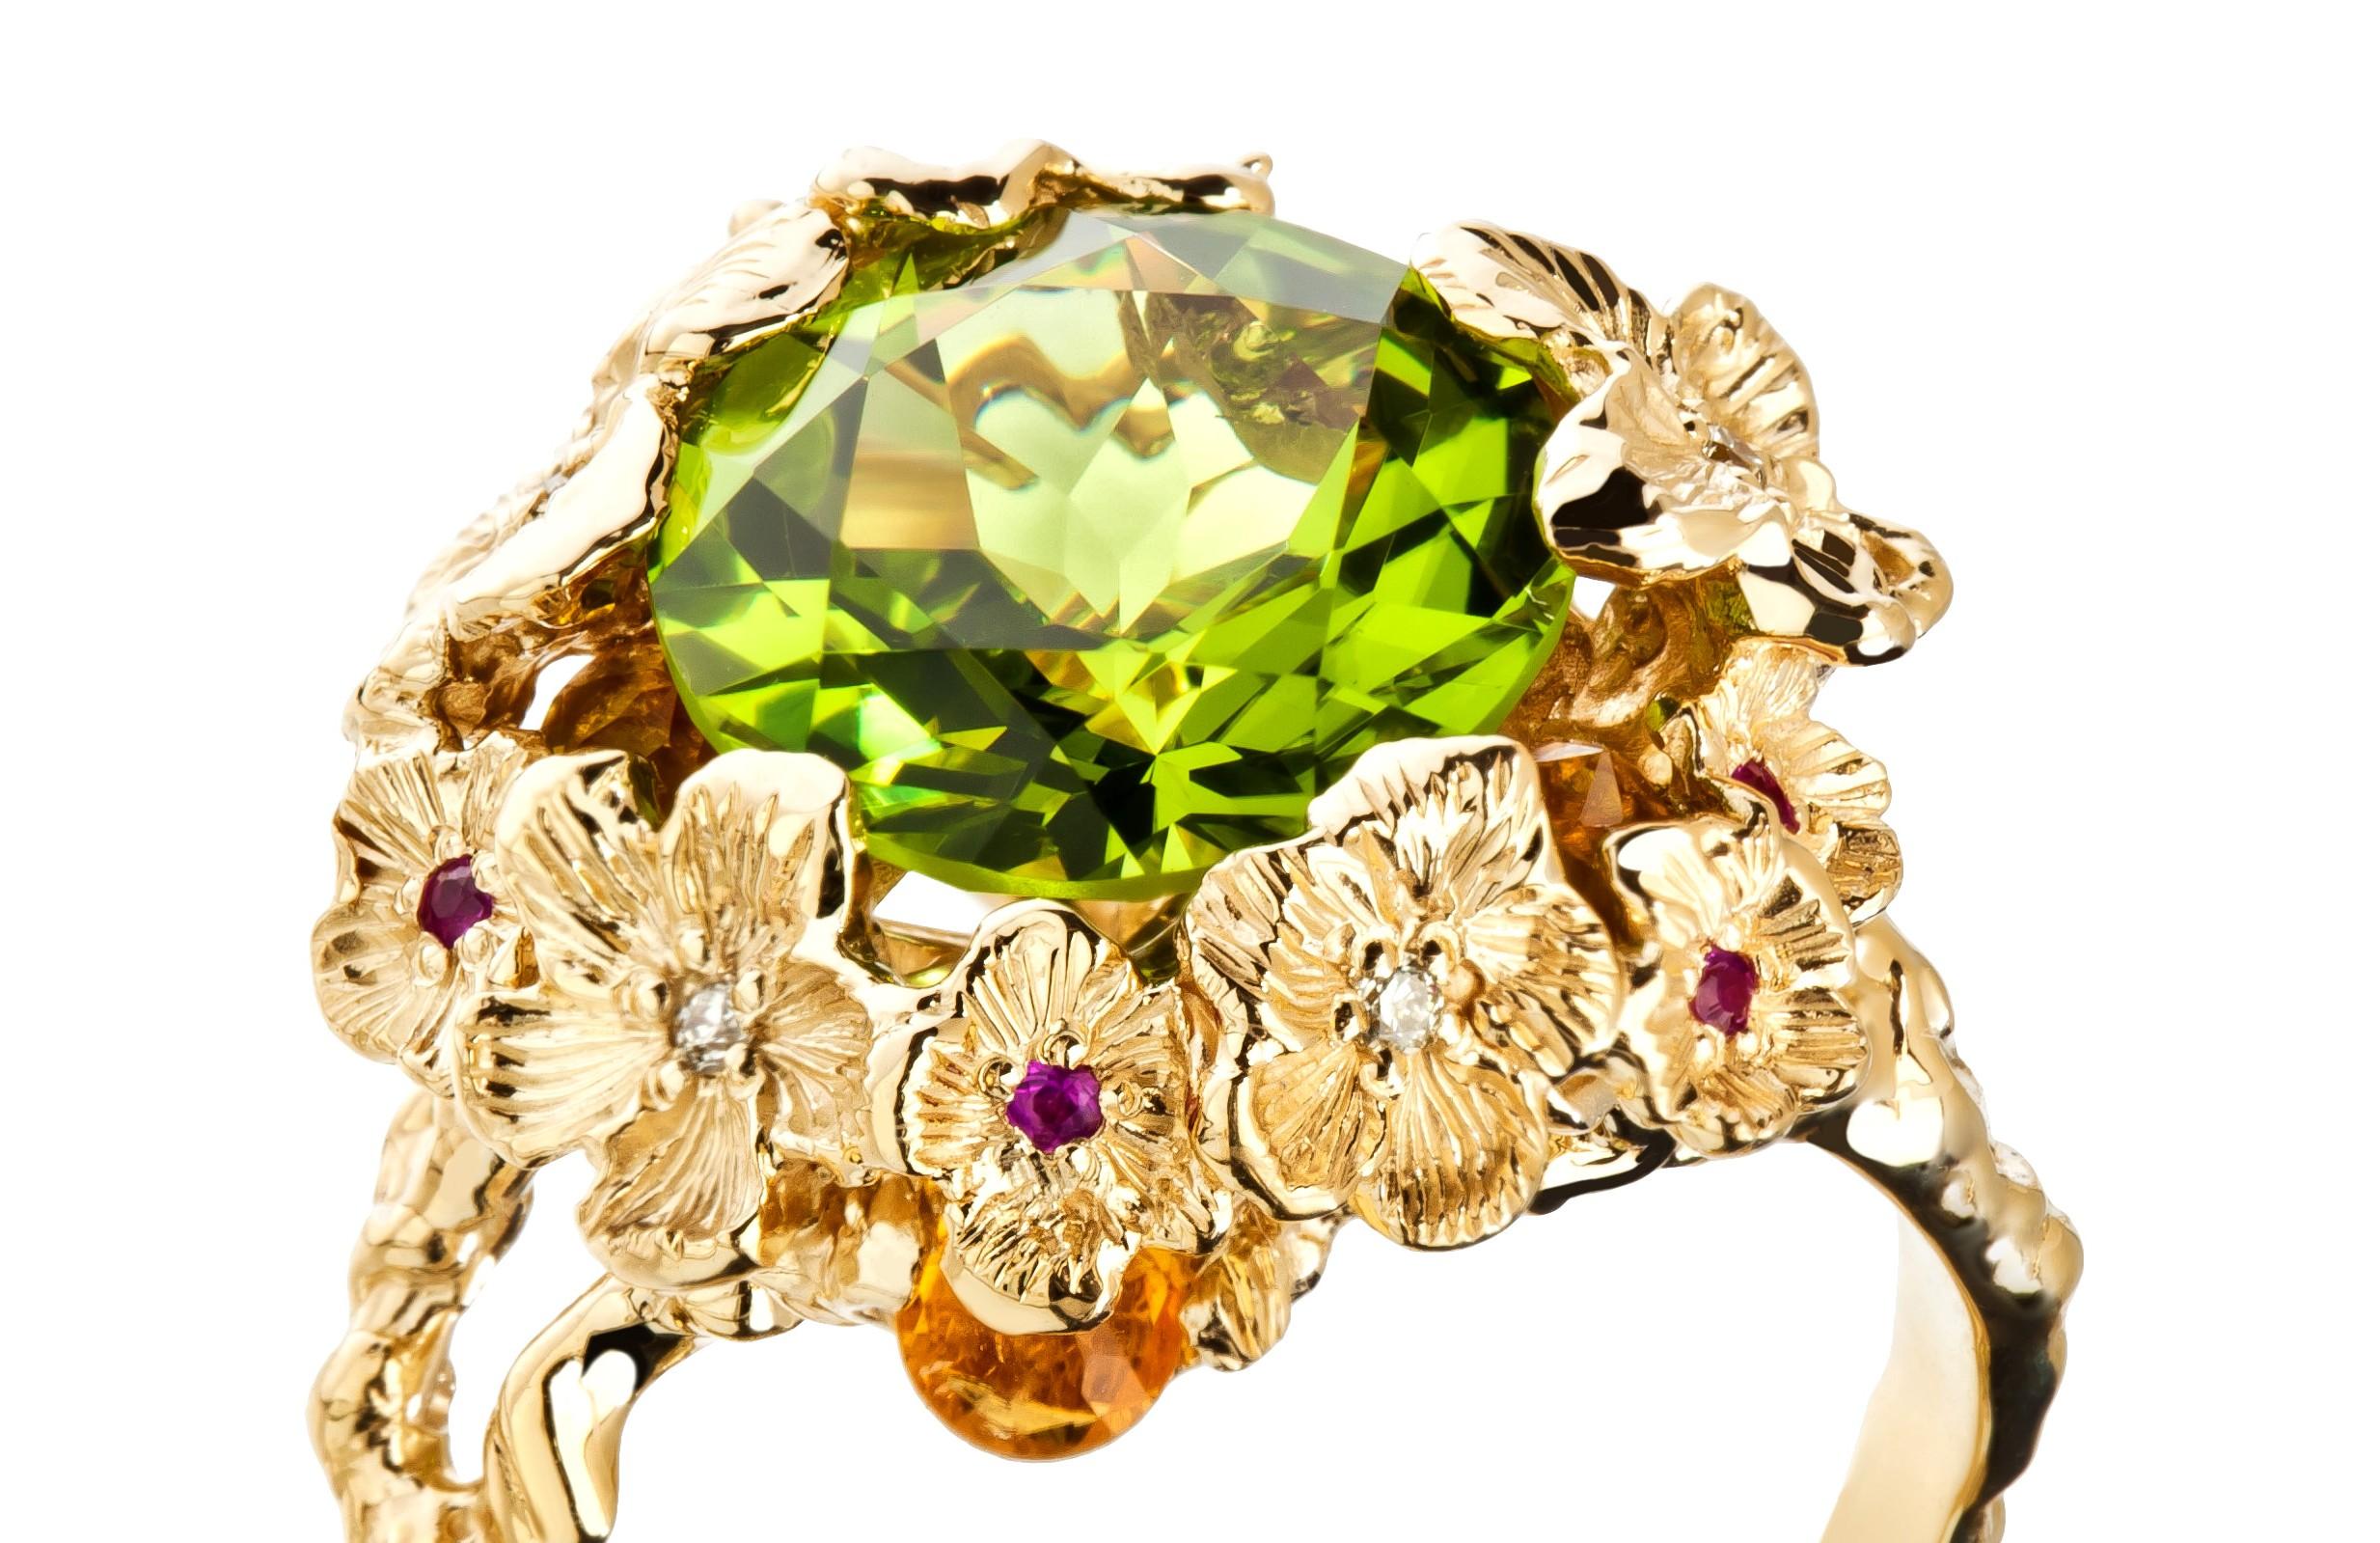 MOISEIKIN's most beautiful peridot stone sparks beyond the artistically carved  branch- like filigree and gives you joy and courage all day long. 
The shining central peridot is delicately held by flower petal prongs. If you look the ring carefully,